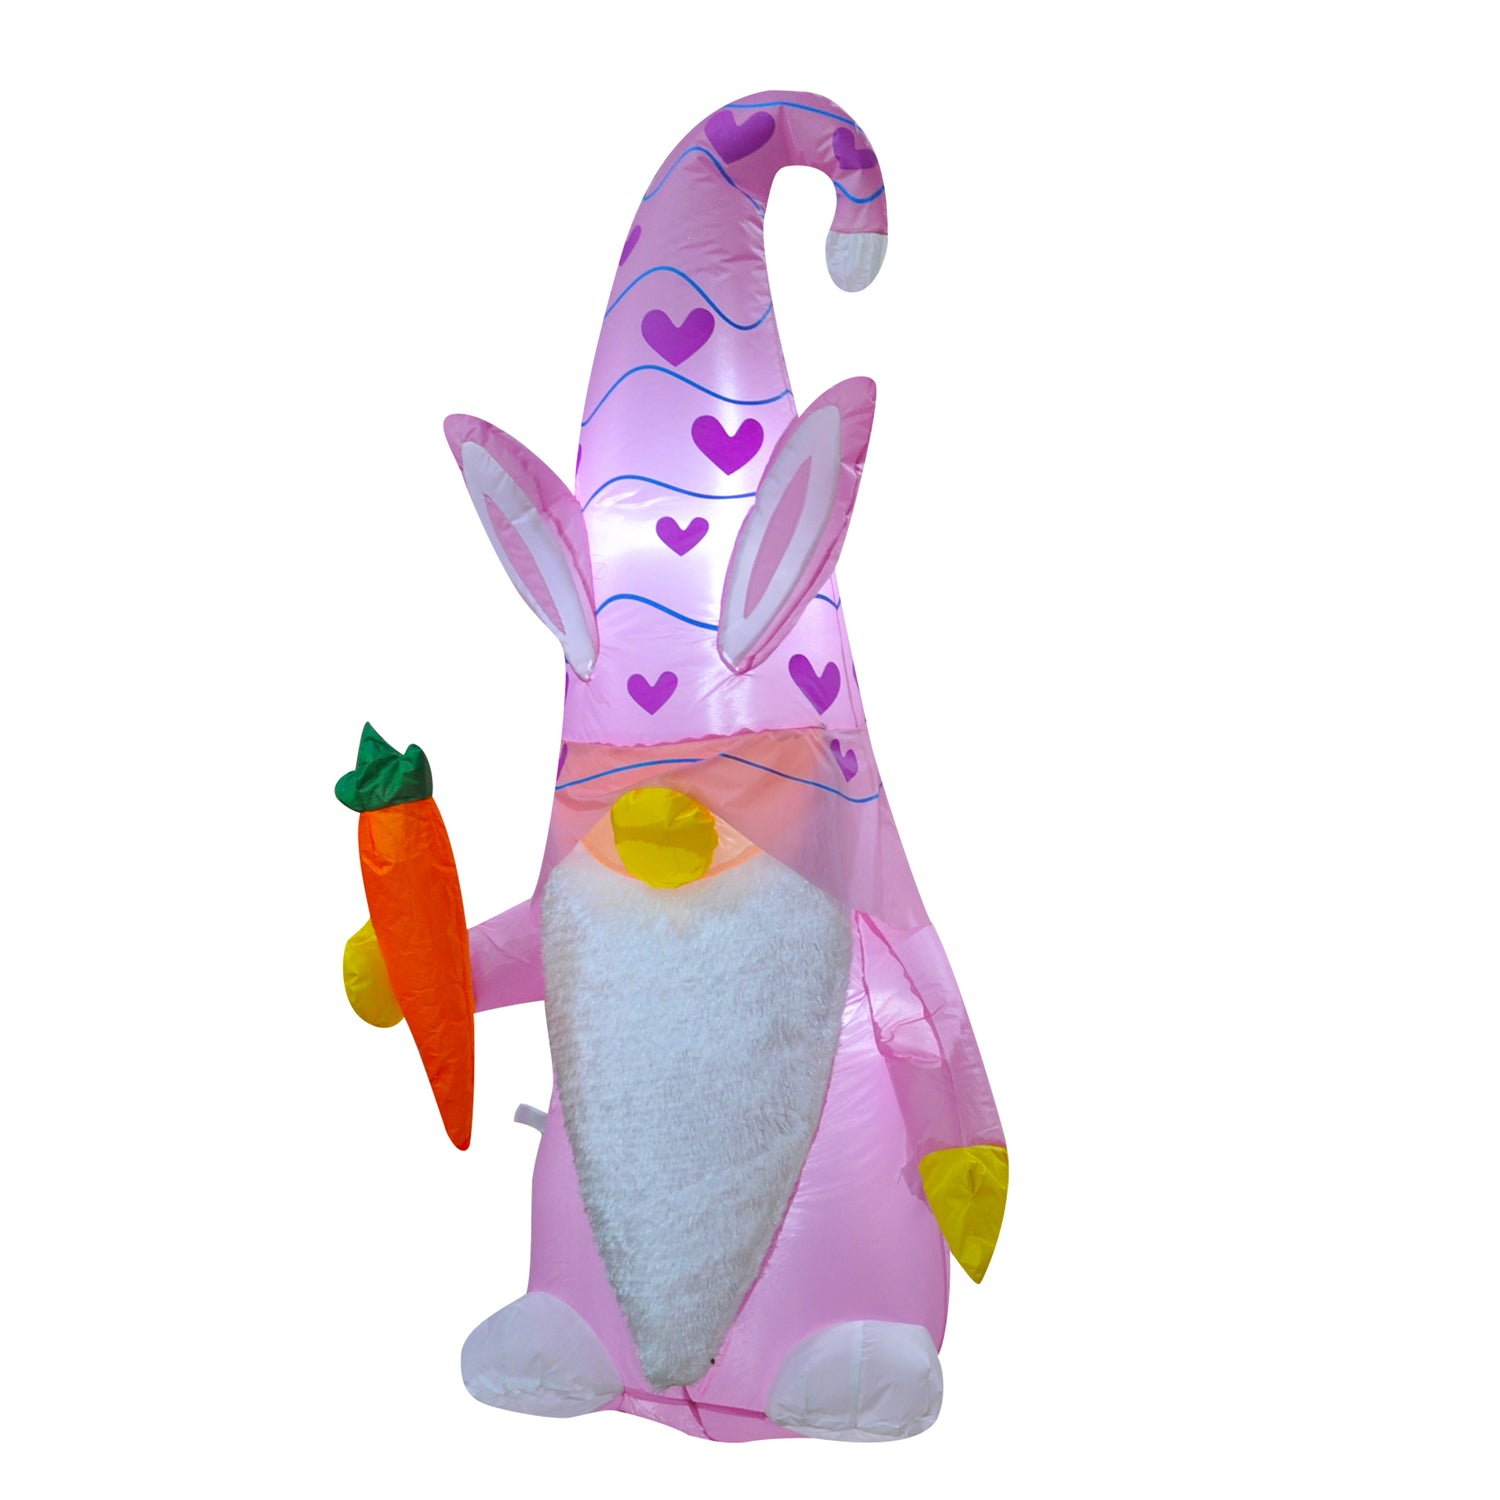 4ft Seasonblow Inflatable Easter Pink Swedish Gnome Decoration.